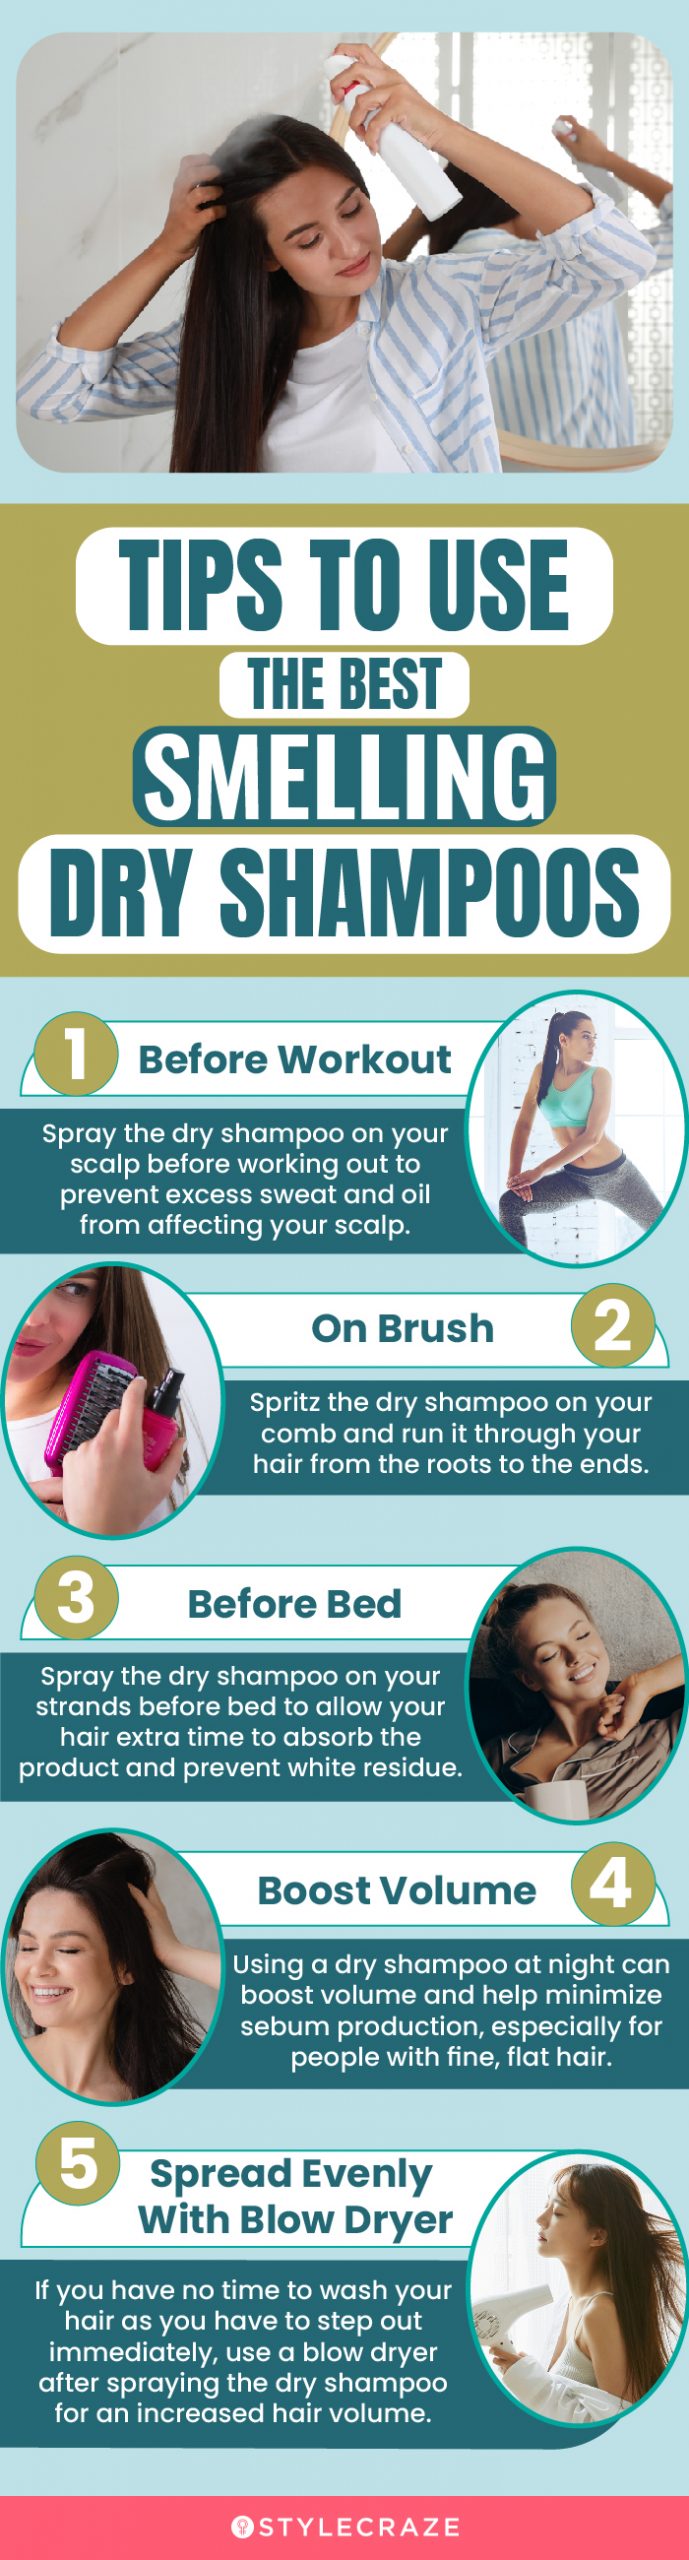 Tips To Use Smelling Dry Shampoos (infographic)